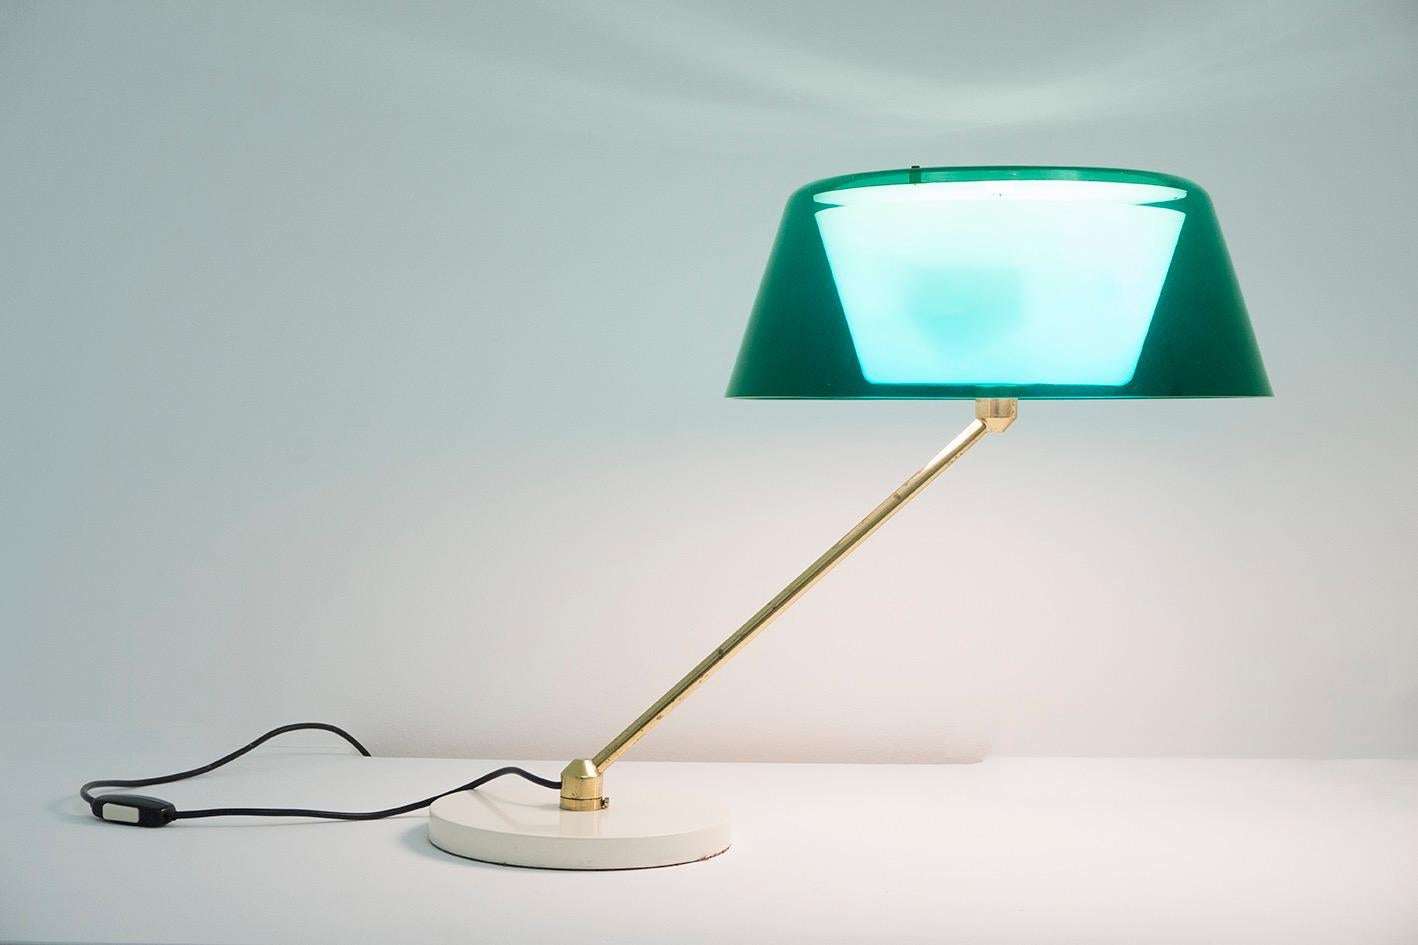 Table lamp, model 25
Construction made of cast iron and brass, with a shade of green plexiglass.

Dimensions: H 46 cm, ø c.a. 35 cm

cf. Catalogo di produzione Oluce.